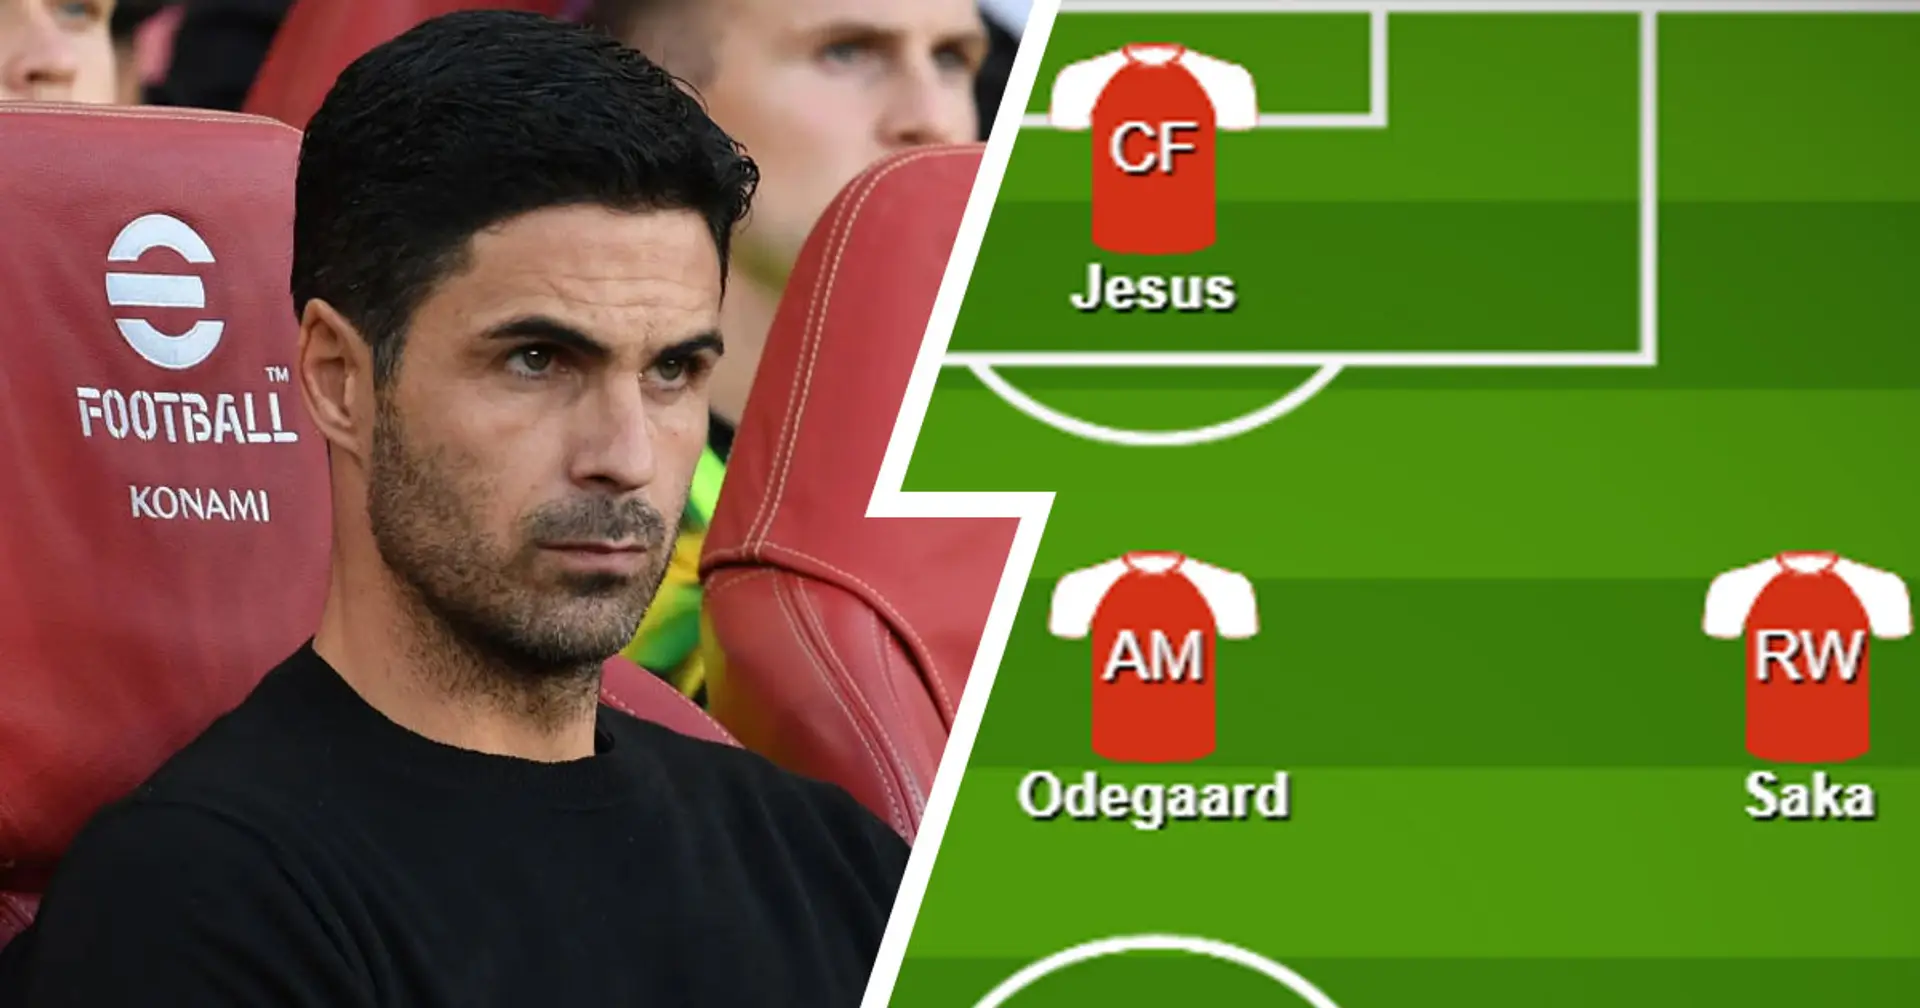 Arsenal's best XI after summer transfers when everyone is fit – shown in pic